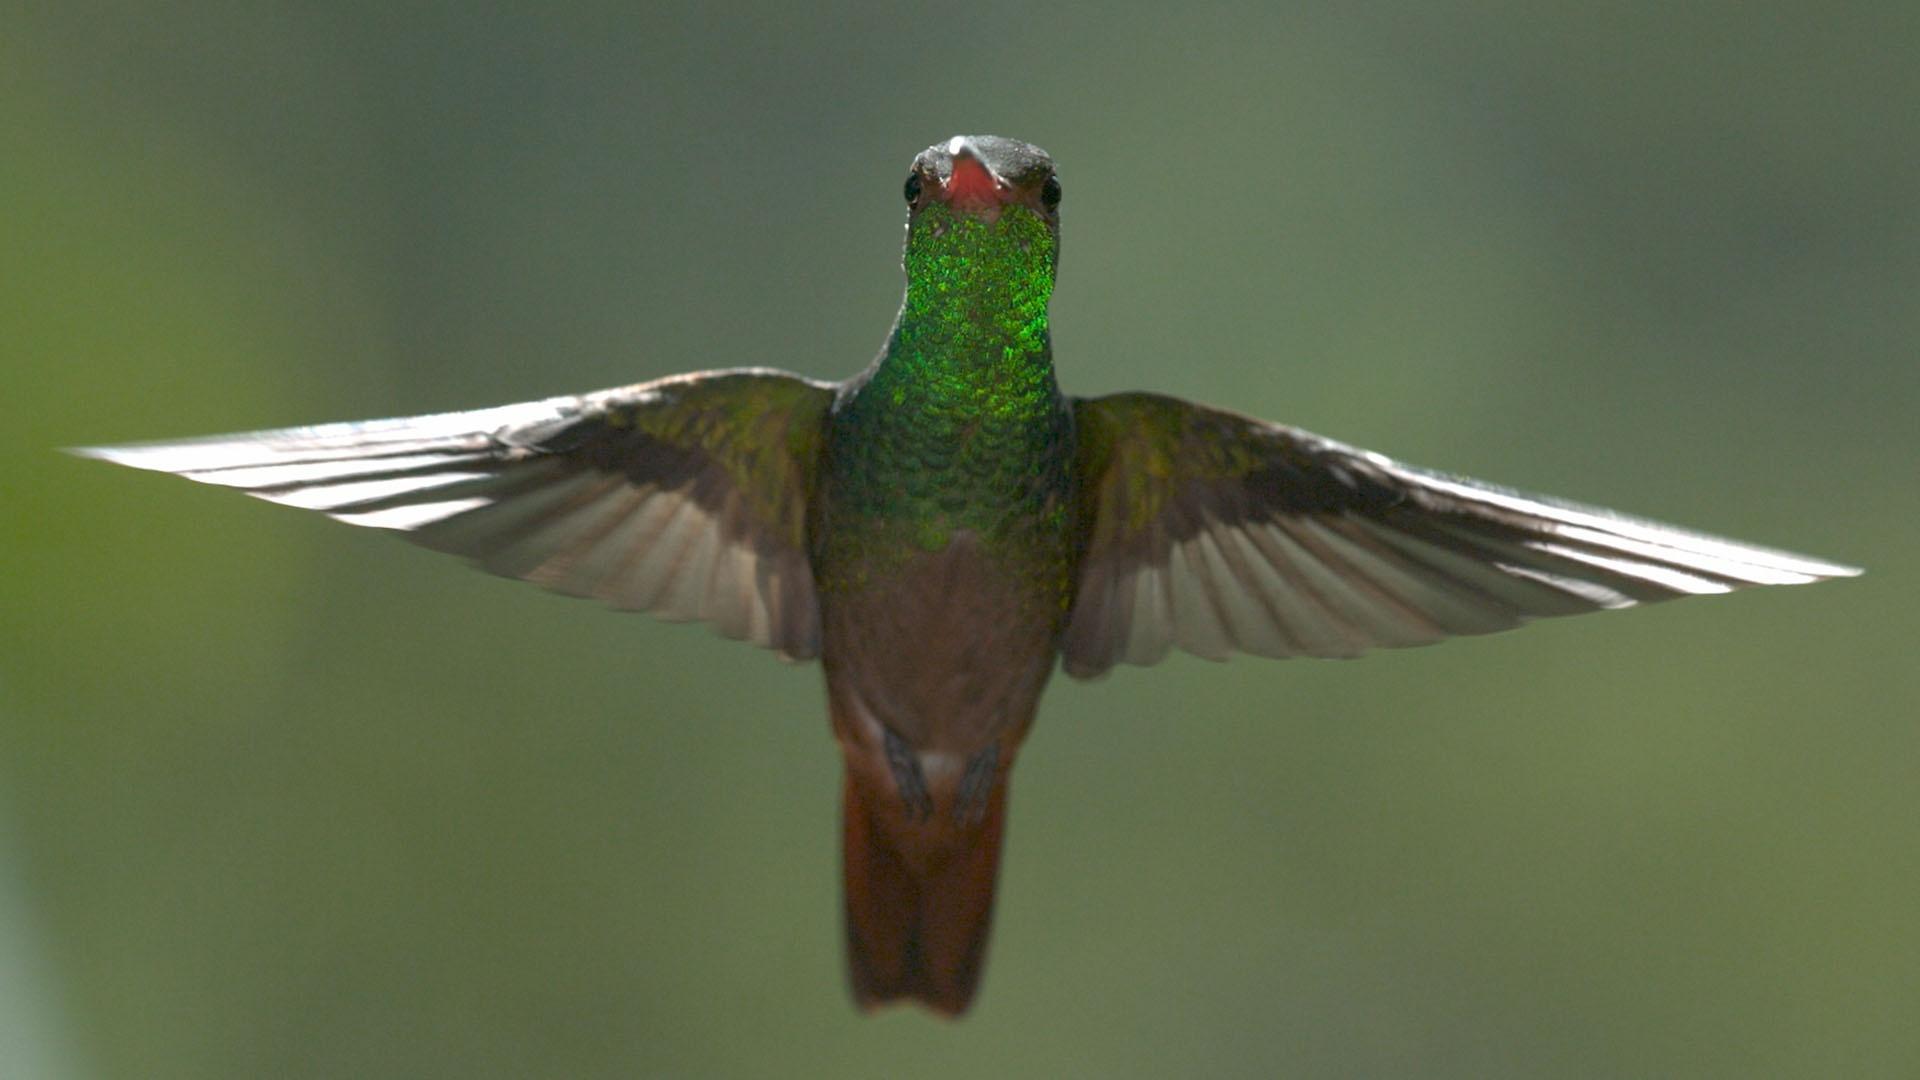 Hummingbird wings beat at up to 80 times a second, giving them the ultimate control in the air.